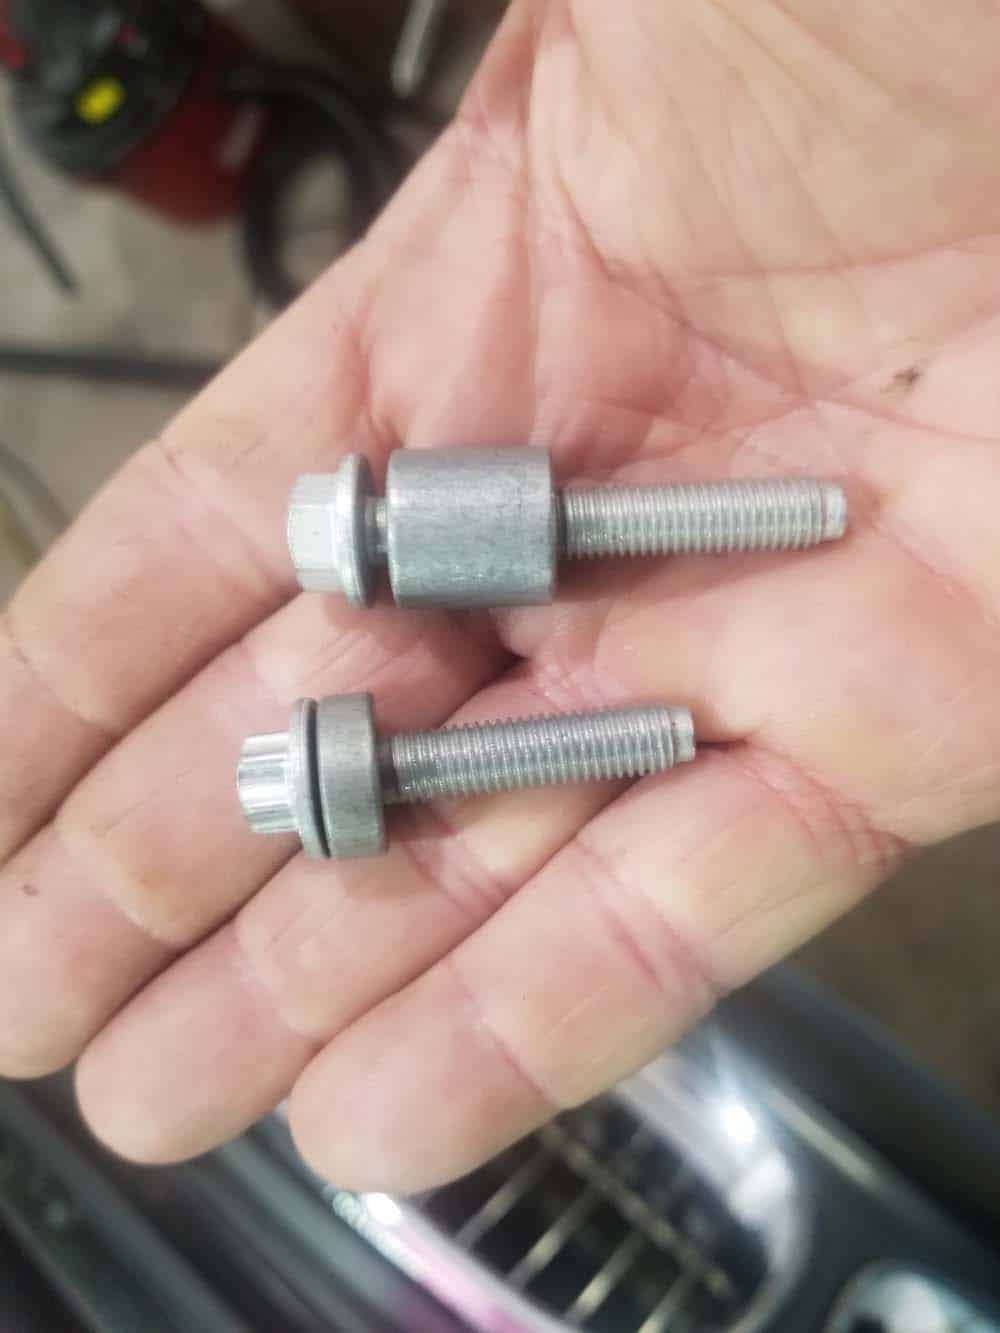 Interior mounting bolts have longer washers